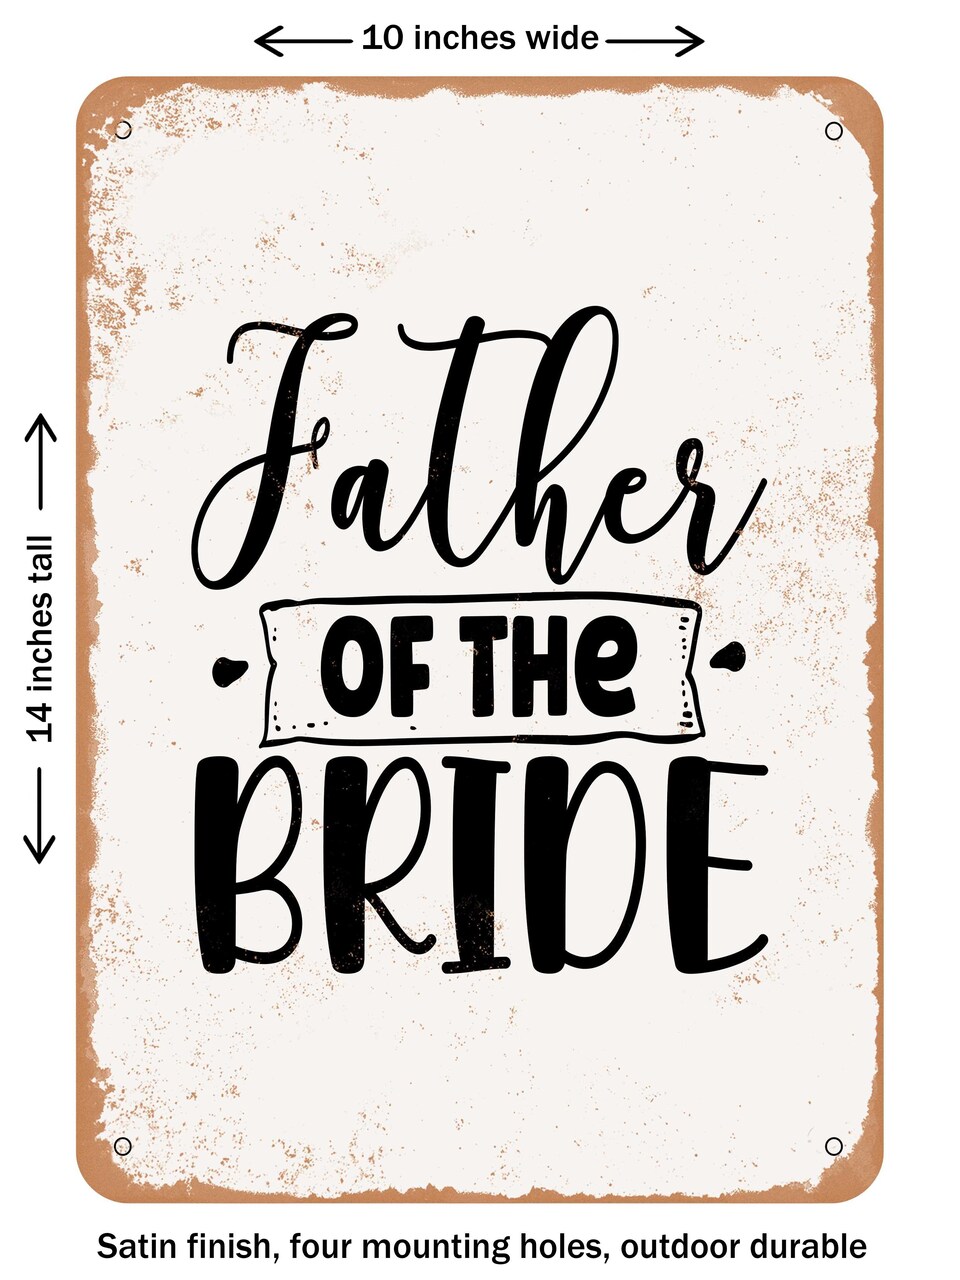 DECORATIVE METAL SIGN - Father of the Bride  - Vintage Rusty Look